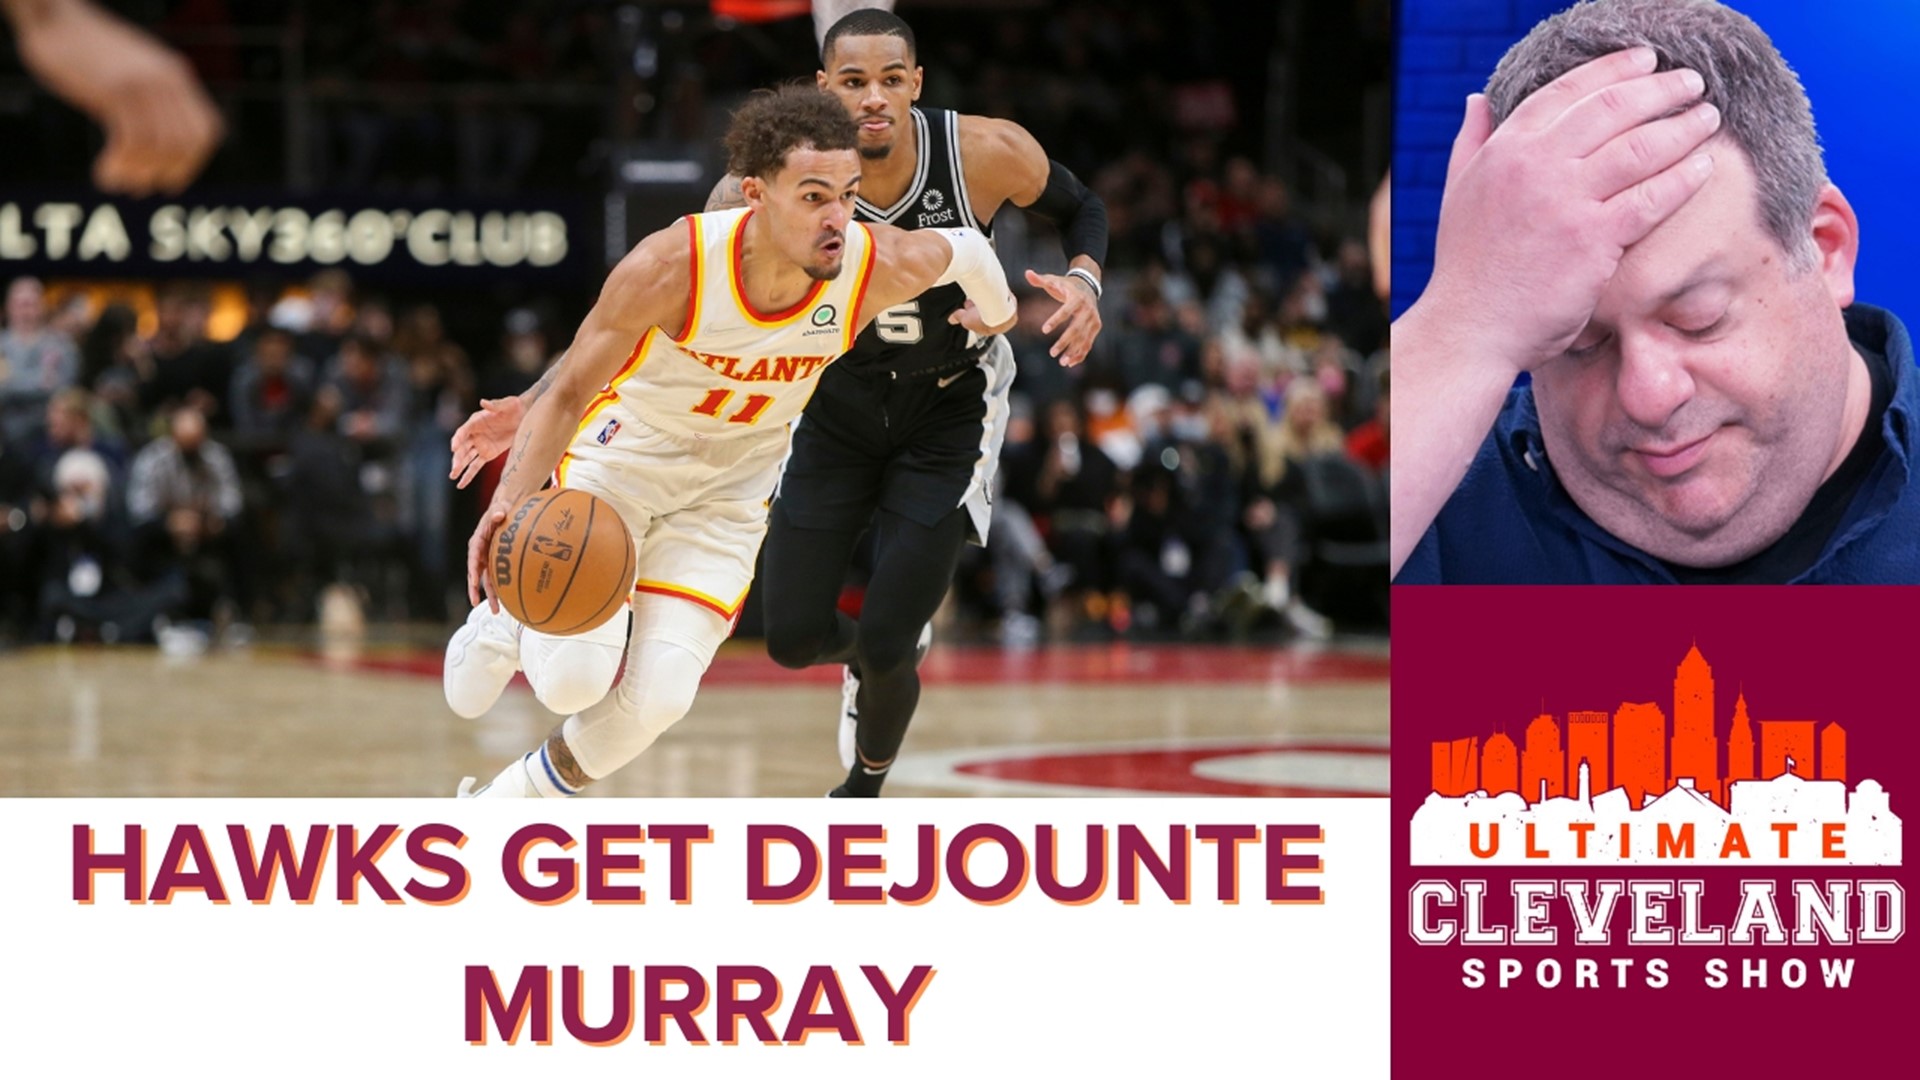 Adam "The Bull" is heated about the Atlanta Hawks not picking Dejounte Murray.